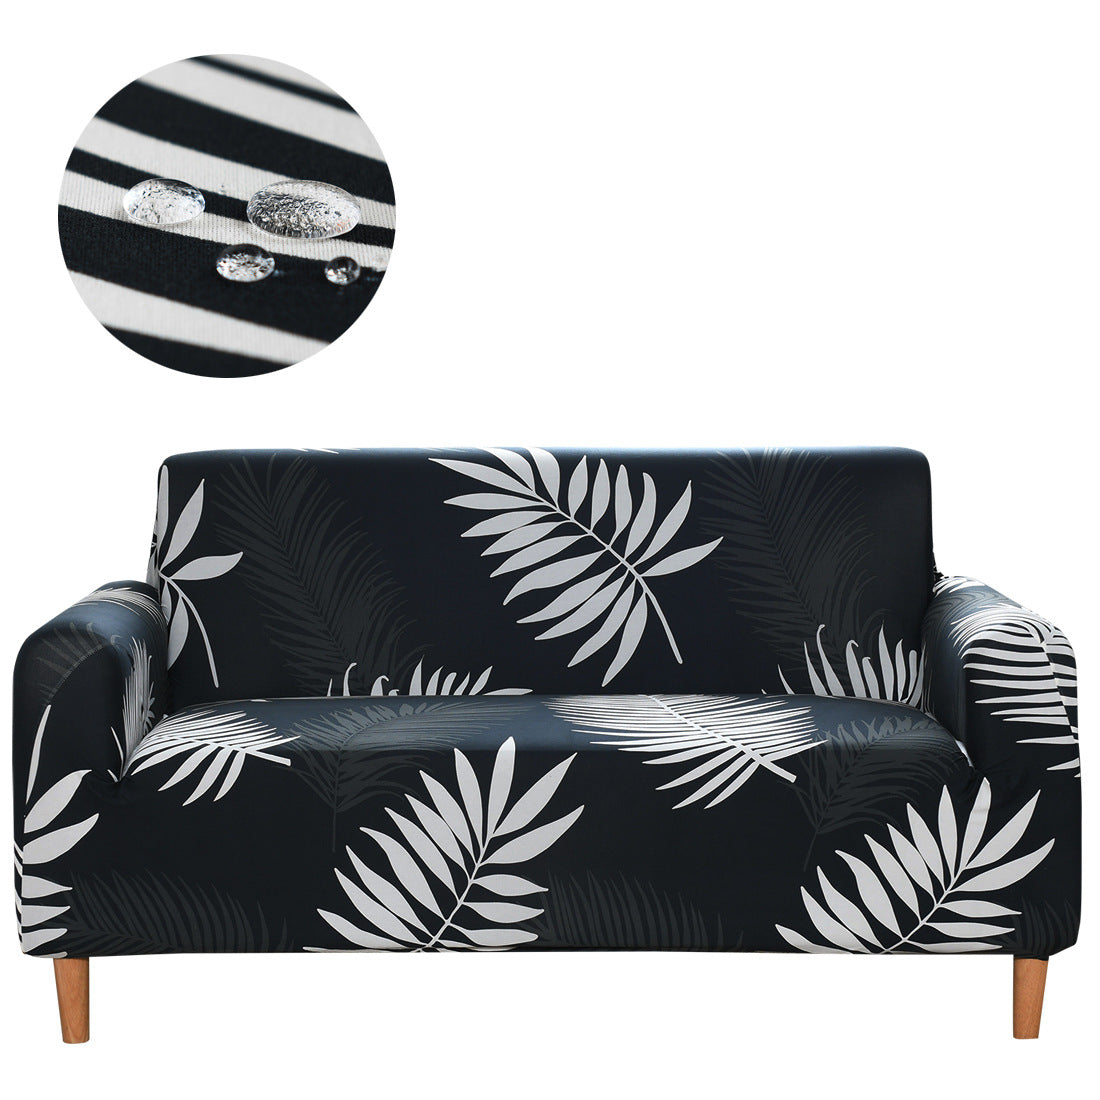 Larg white leafs in black background HomeStyle sofa cover